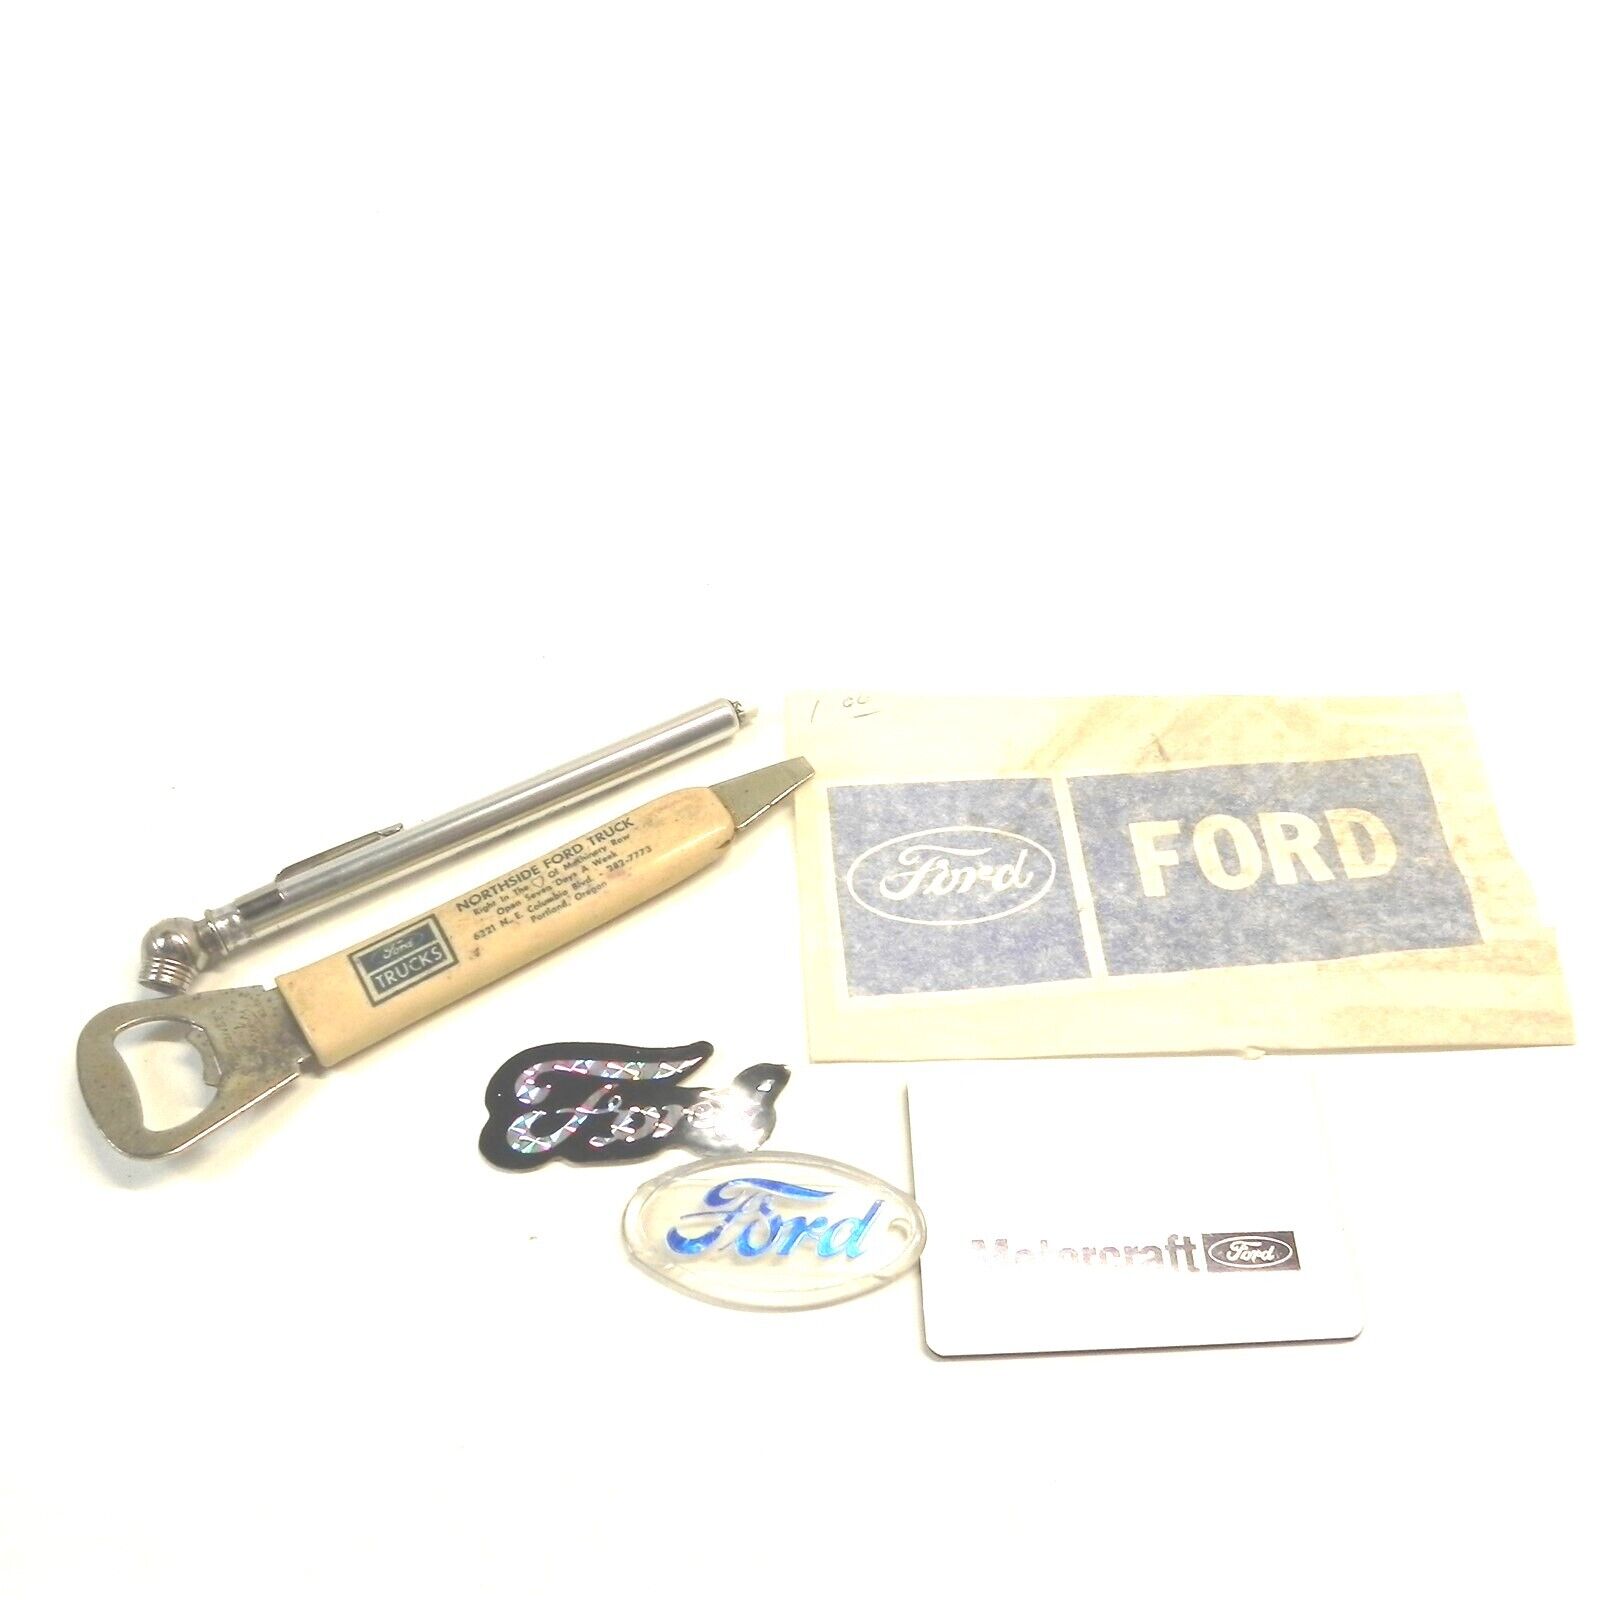 VINTAGE LOT OF 6 FORD PROMO AD GIVE AWAY MIXED TOOLS PROMO ITEMS PRE OWNED VTG